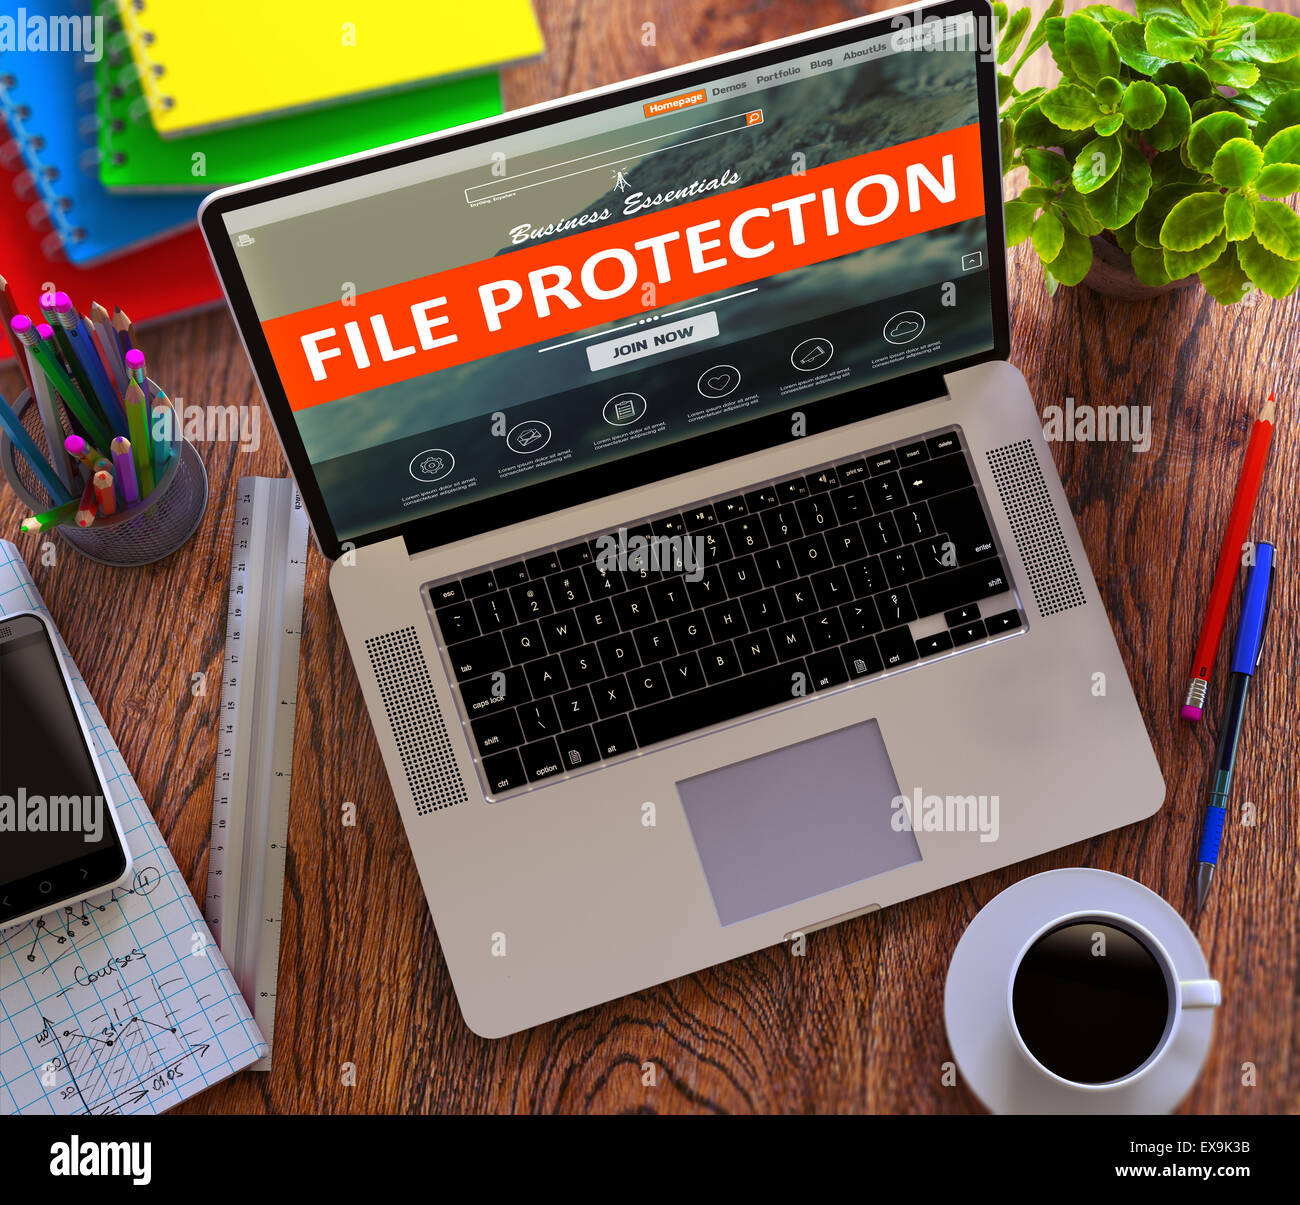 File Protection. Office Working Concept. Stock Photo